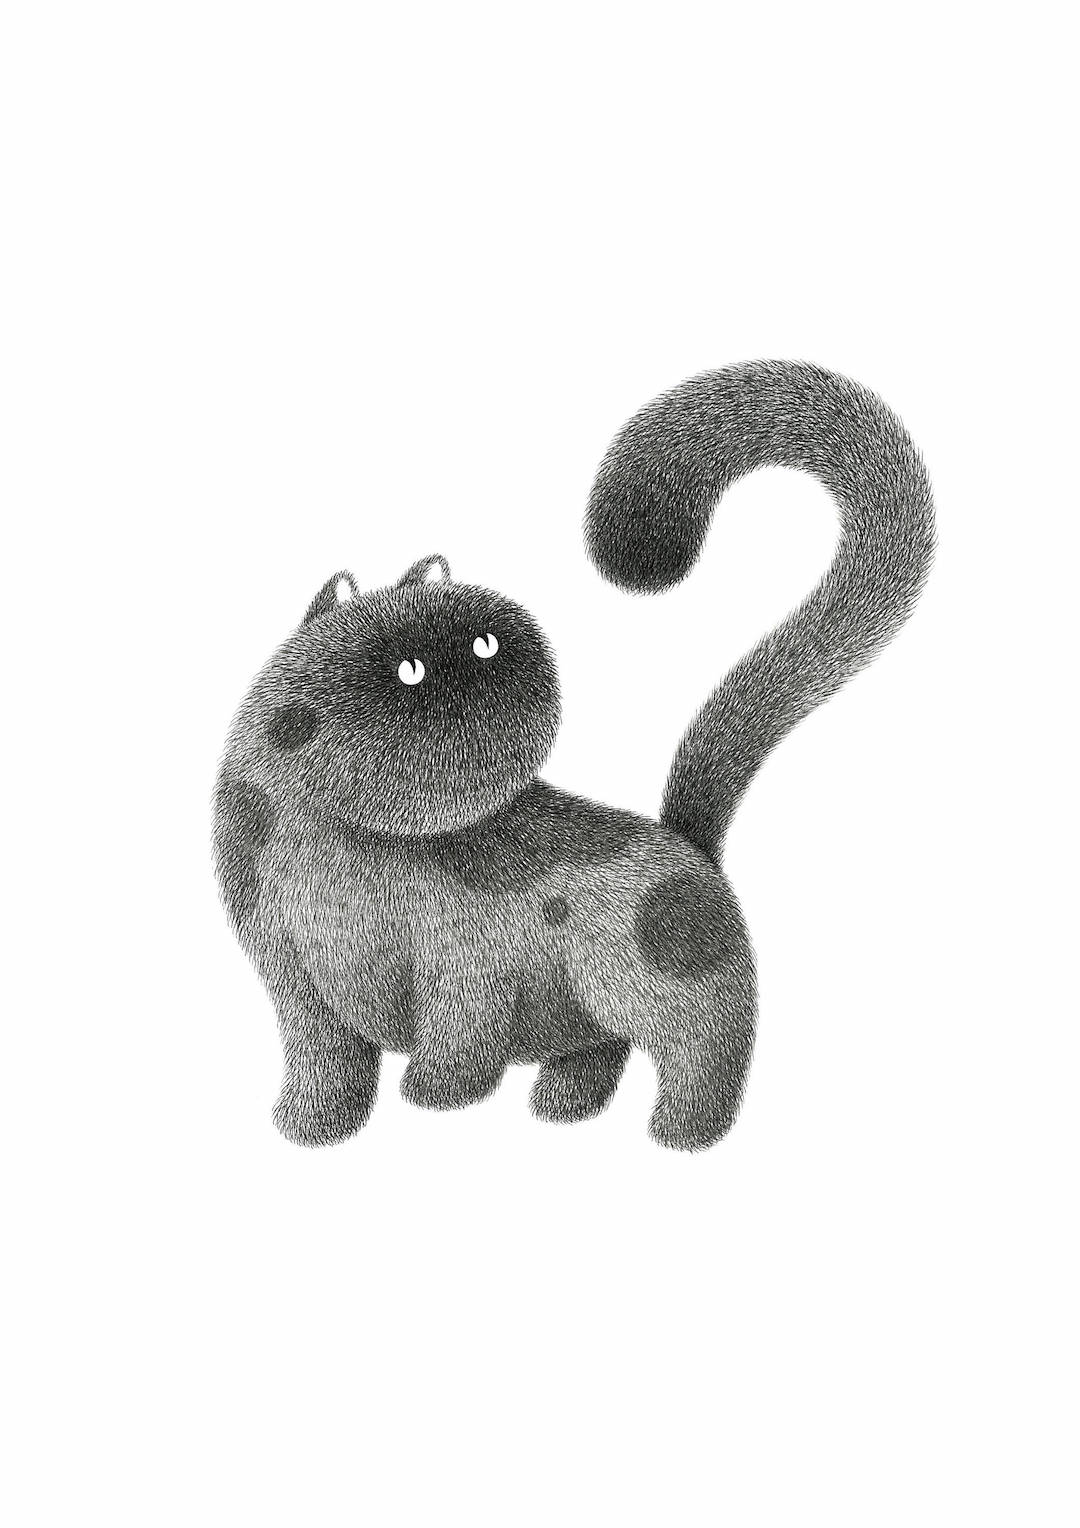 Cat Art Drawings of Felines Too Fluffy for Their Own Good